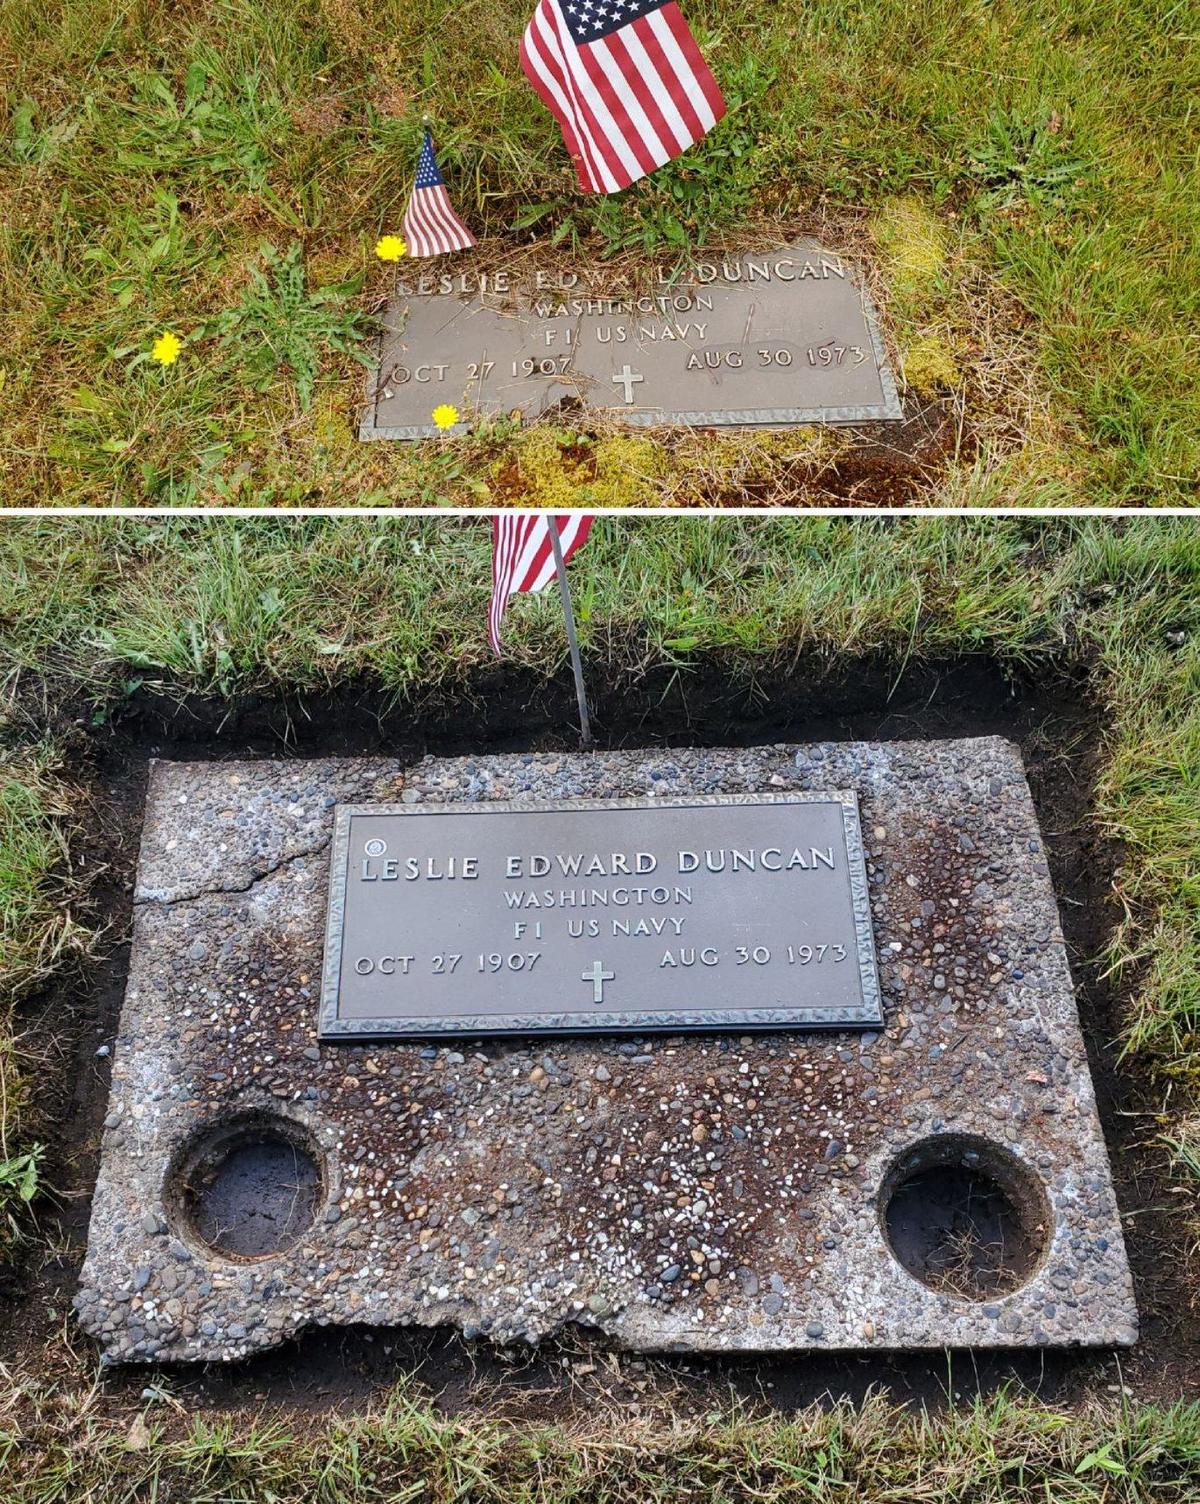 (Courtesy of <a href="https://www.facebook.com/Rochester-cemetery-cleaning-Angels-115291300267471/">Kelly Mulvaney</a>)